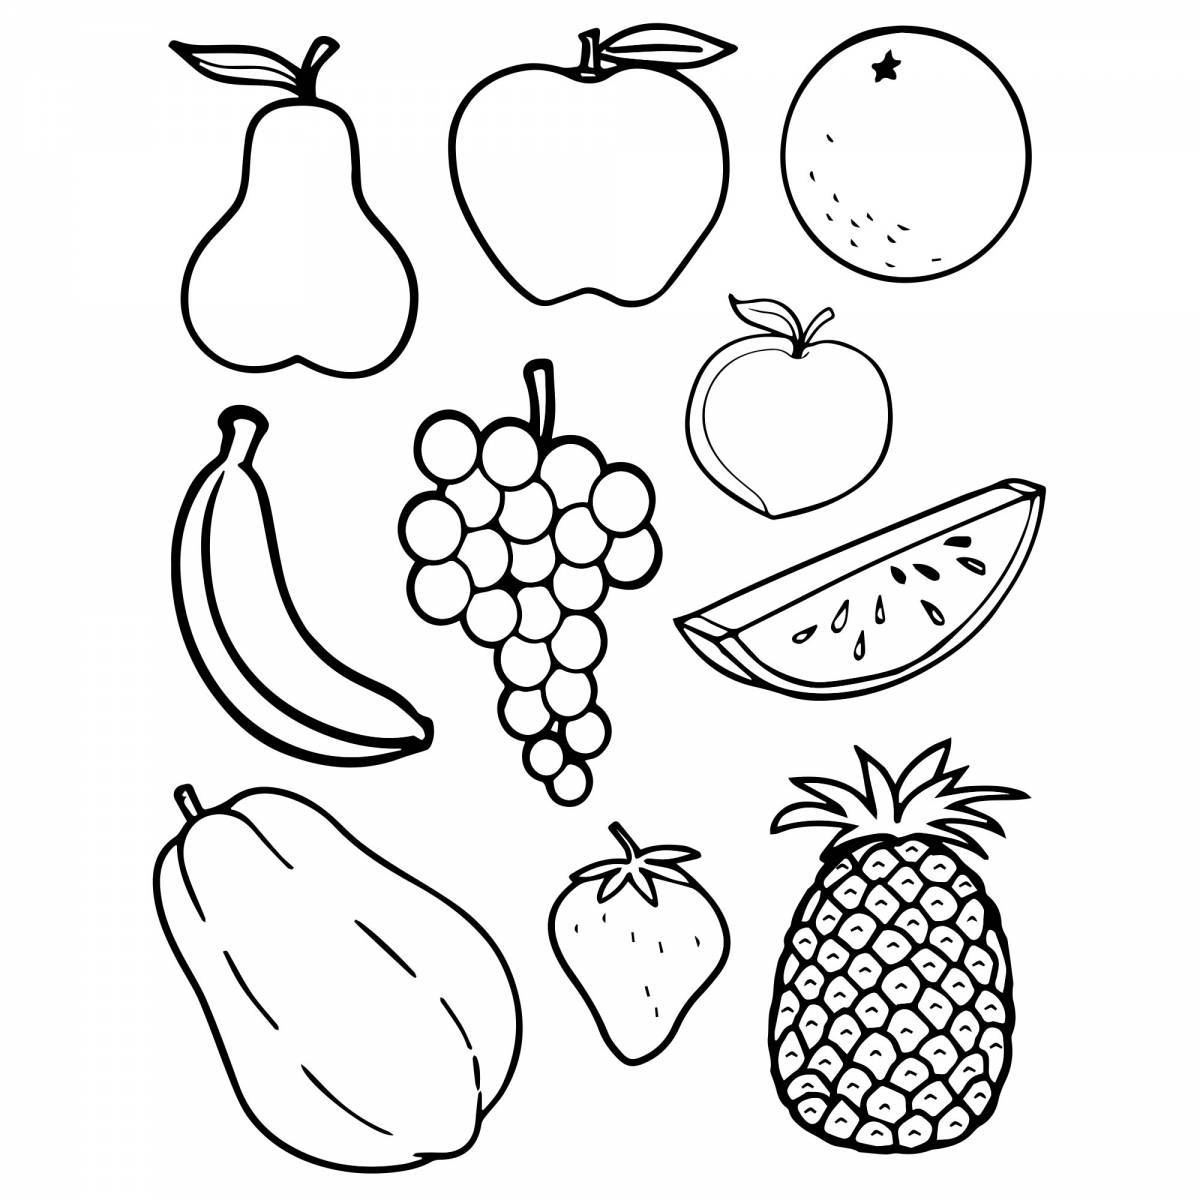 Living fruit coloring page